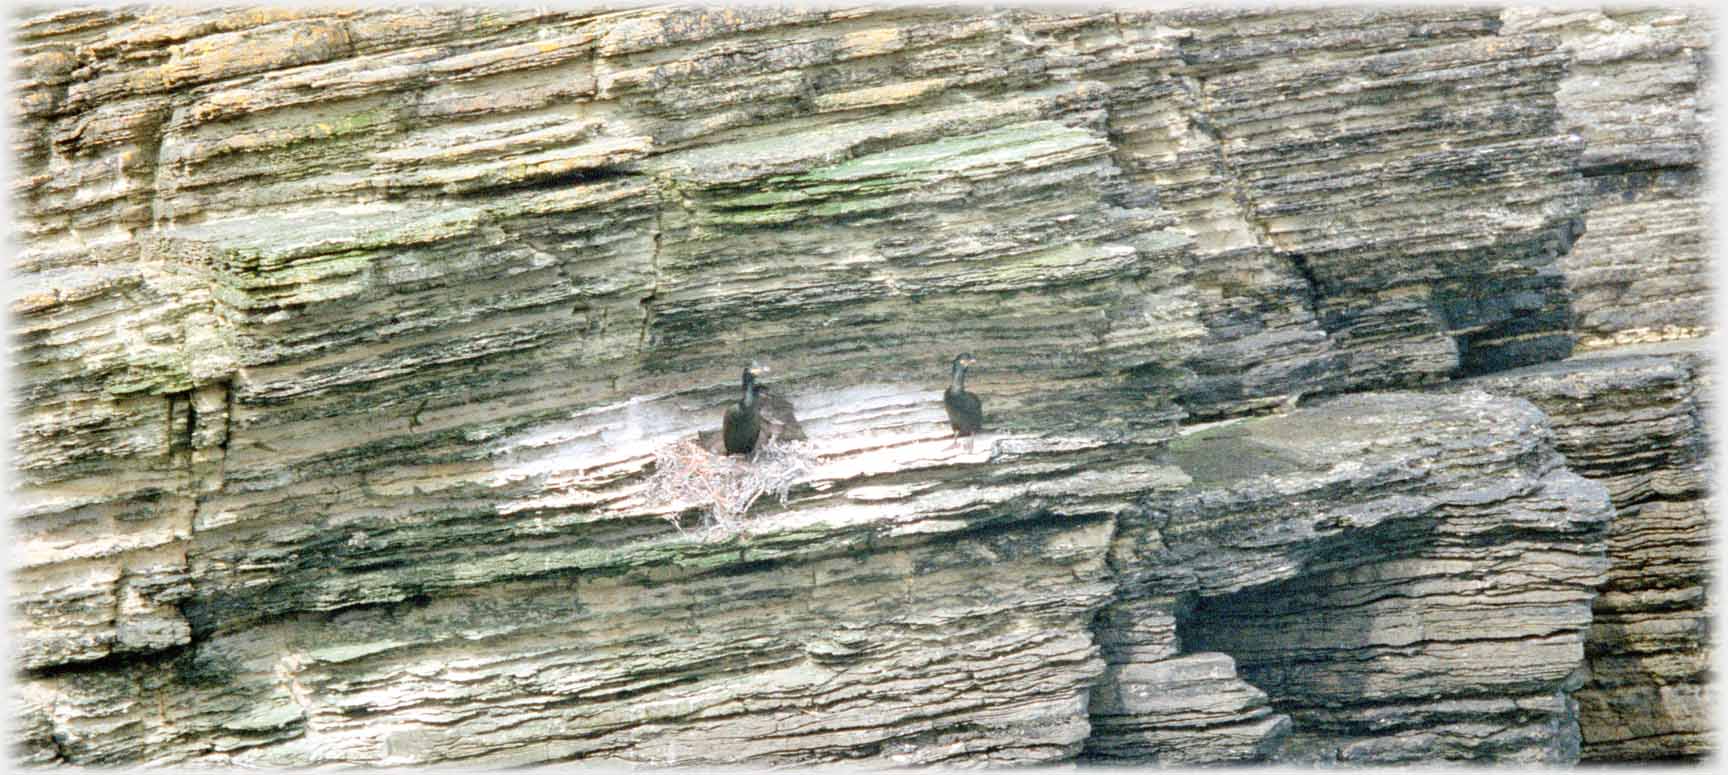 SIngle nest site with two shags.